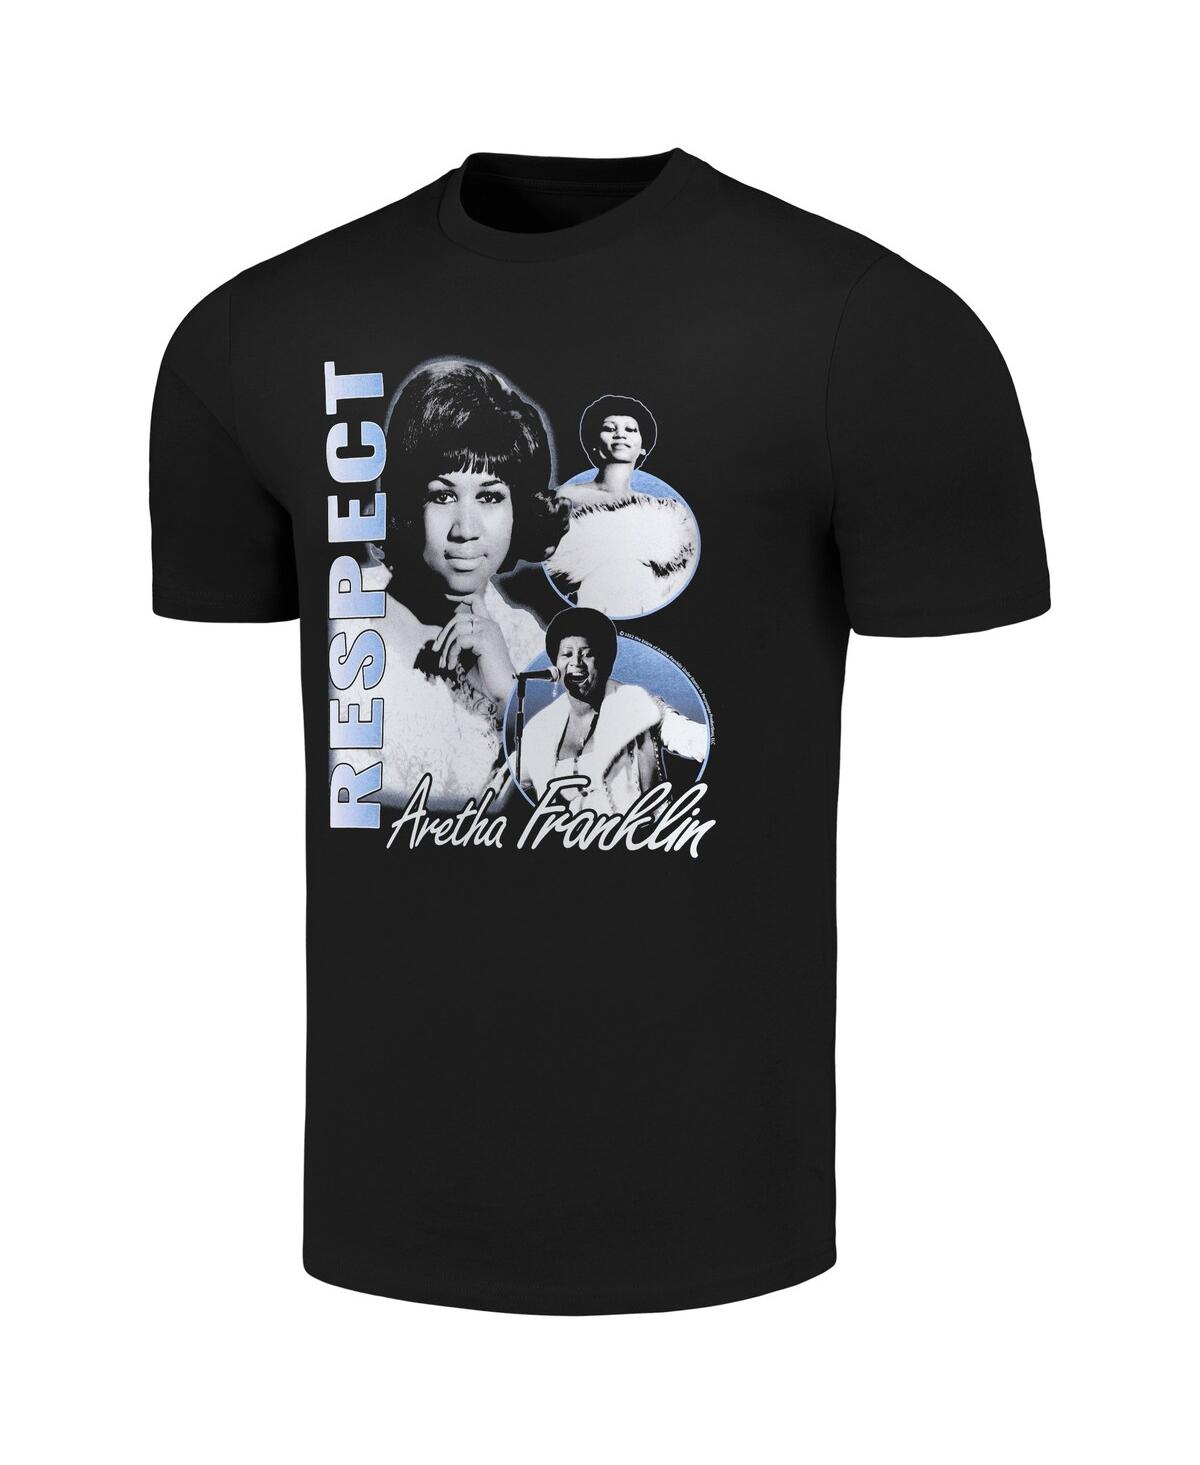 Shop American Classics Men's Black Aretha Franklin Find Out What It Means To Me T-shirt